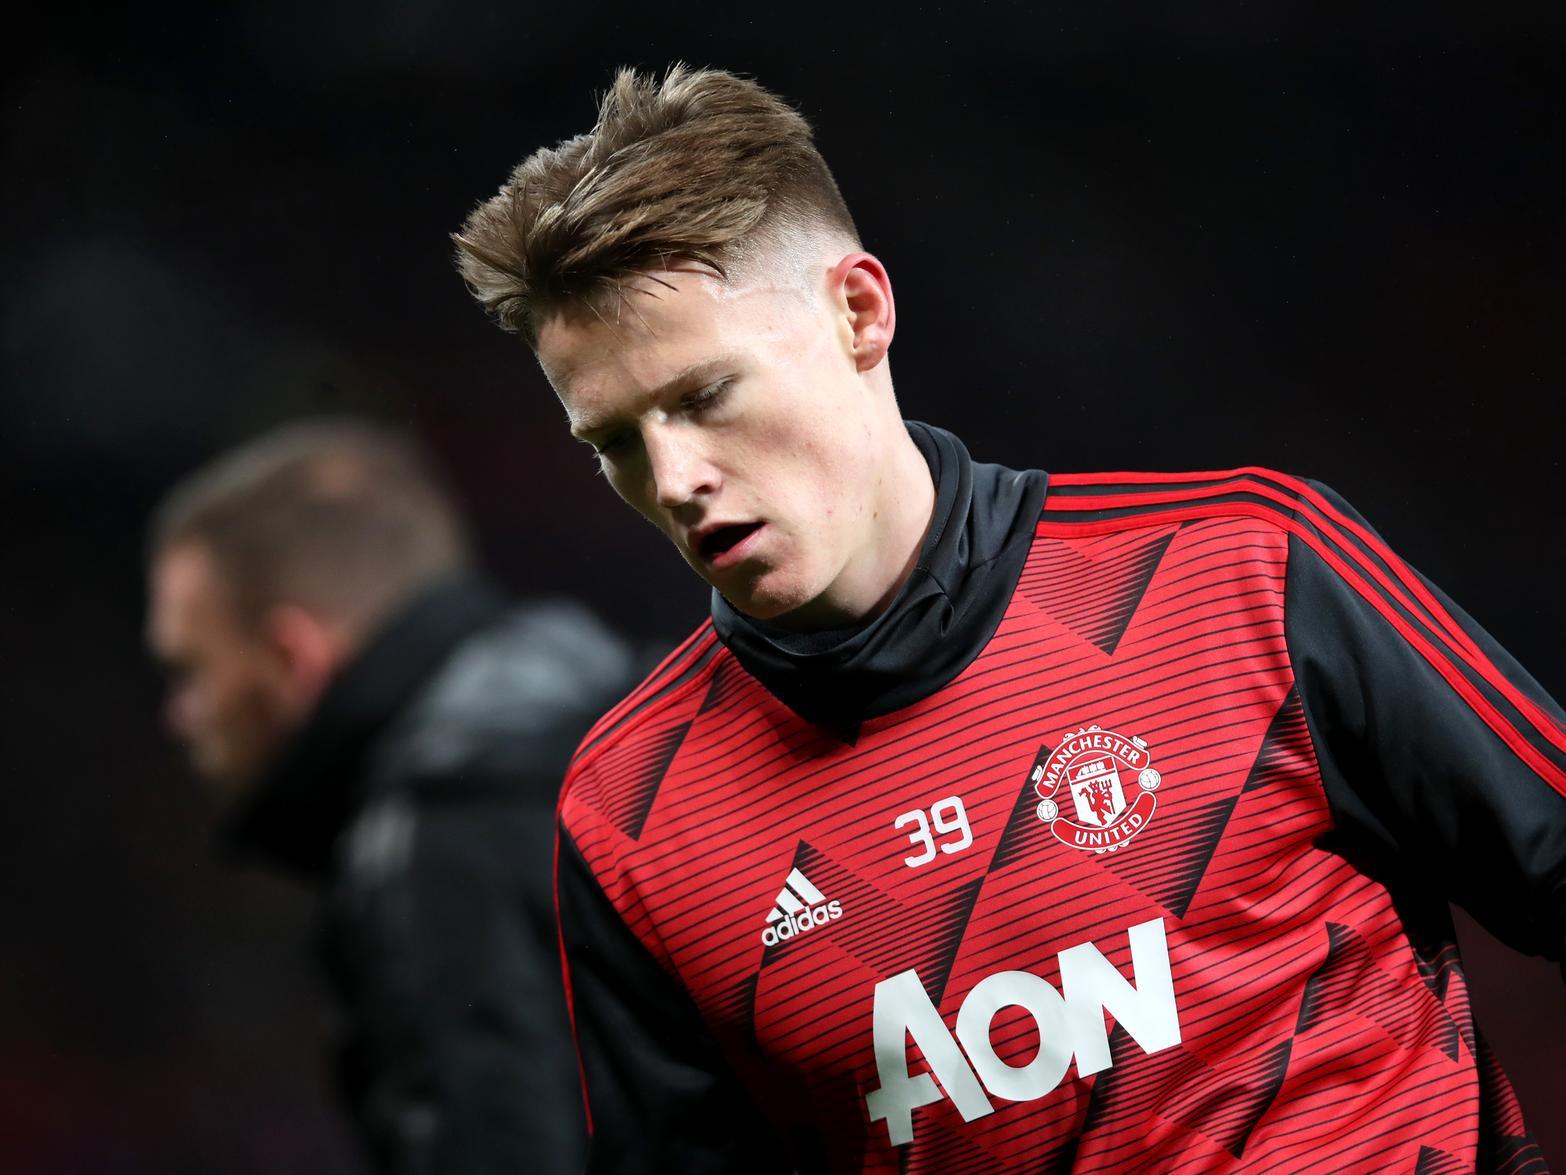 The Red Devils are in fine spirits after their 2-0 win over Chelsea last weekend, and they'll be eager to push on in their bid to secure Champions League football. They'll be hoping Scott McTominay is back to face the Hornets.